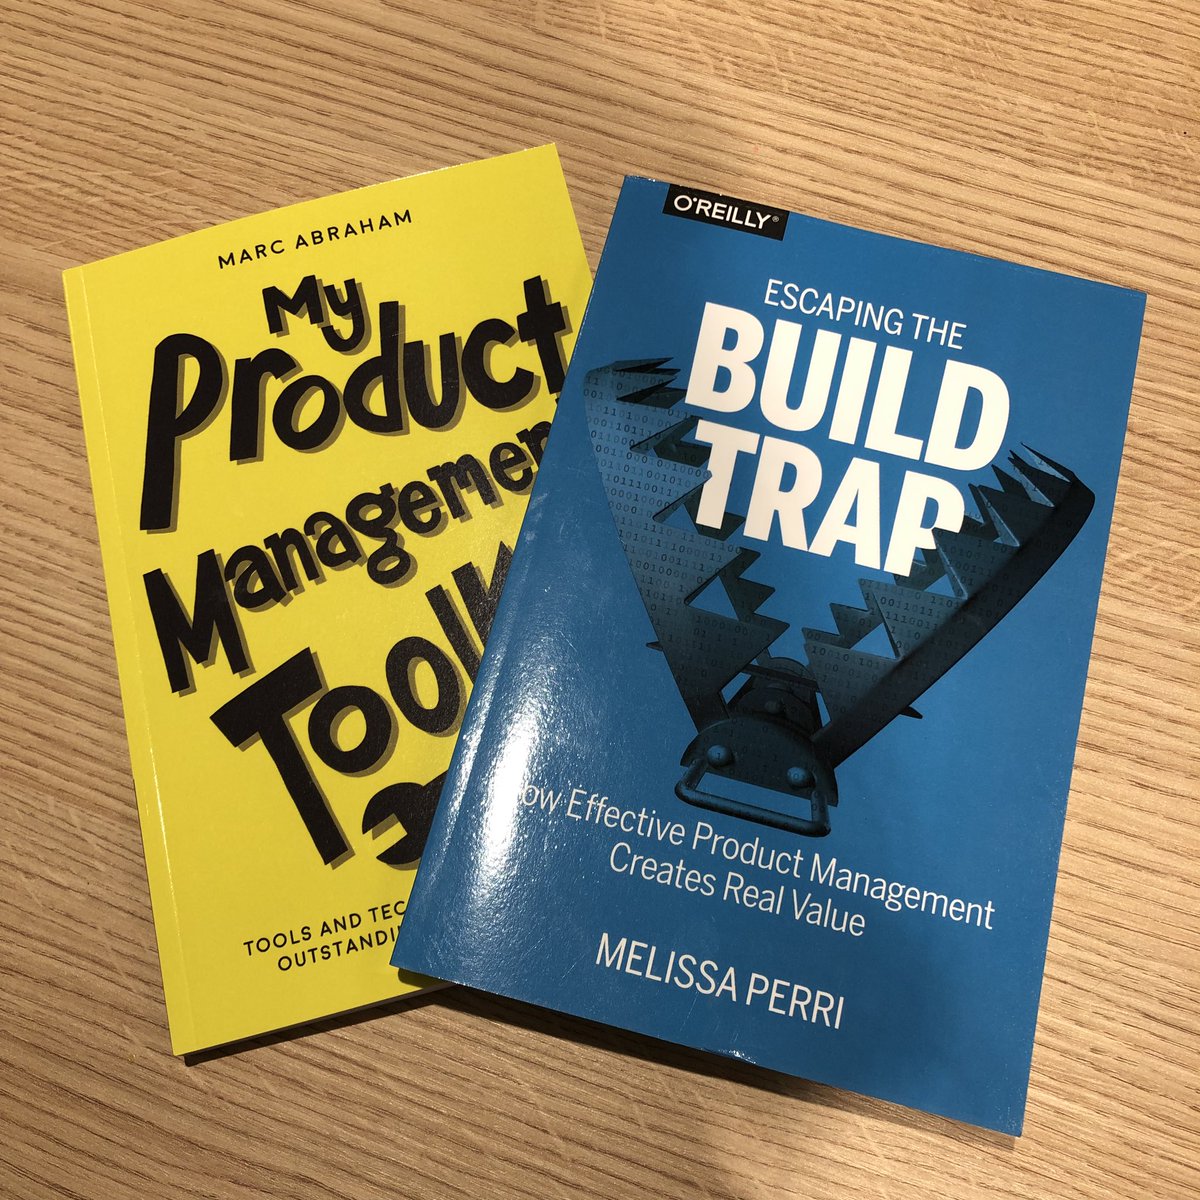 Some great prizes given away today at #ProductCampBB19 @danolsen @Wriggle_Bristol @bfgmartin @marcabraham @MAA1 @herbigt